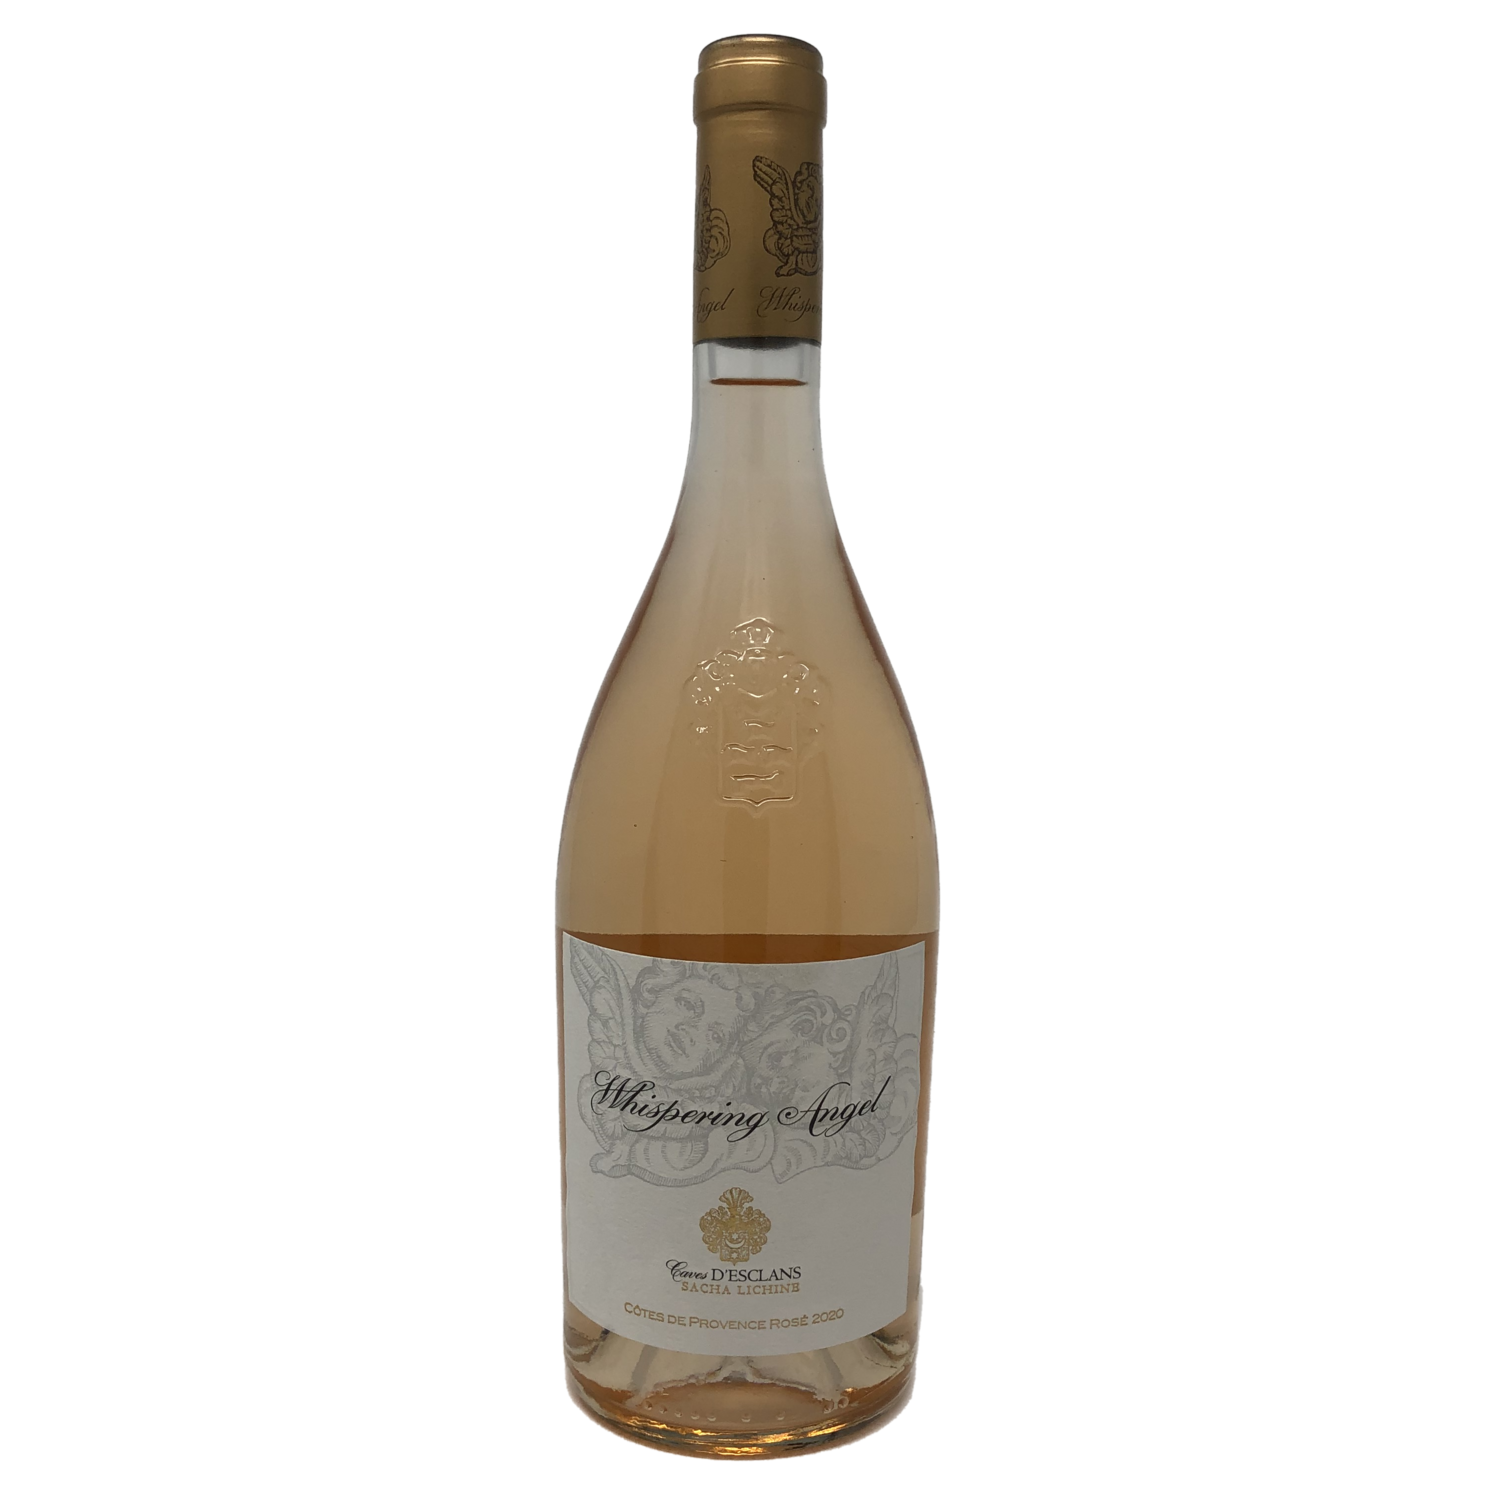 Chateau D'Esclans Whispering Angel Rose 2020